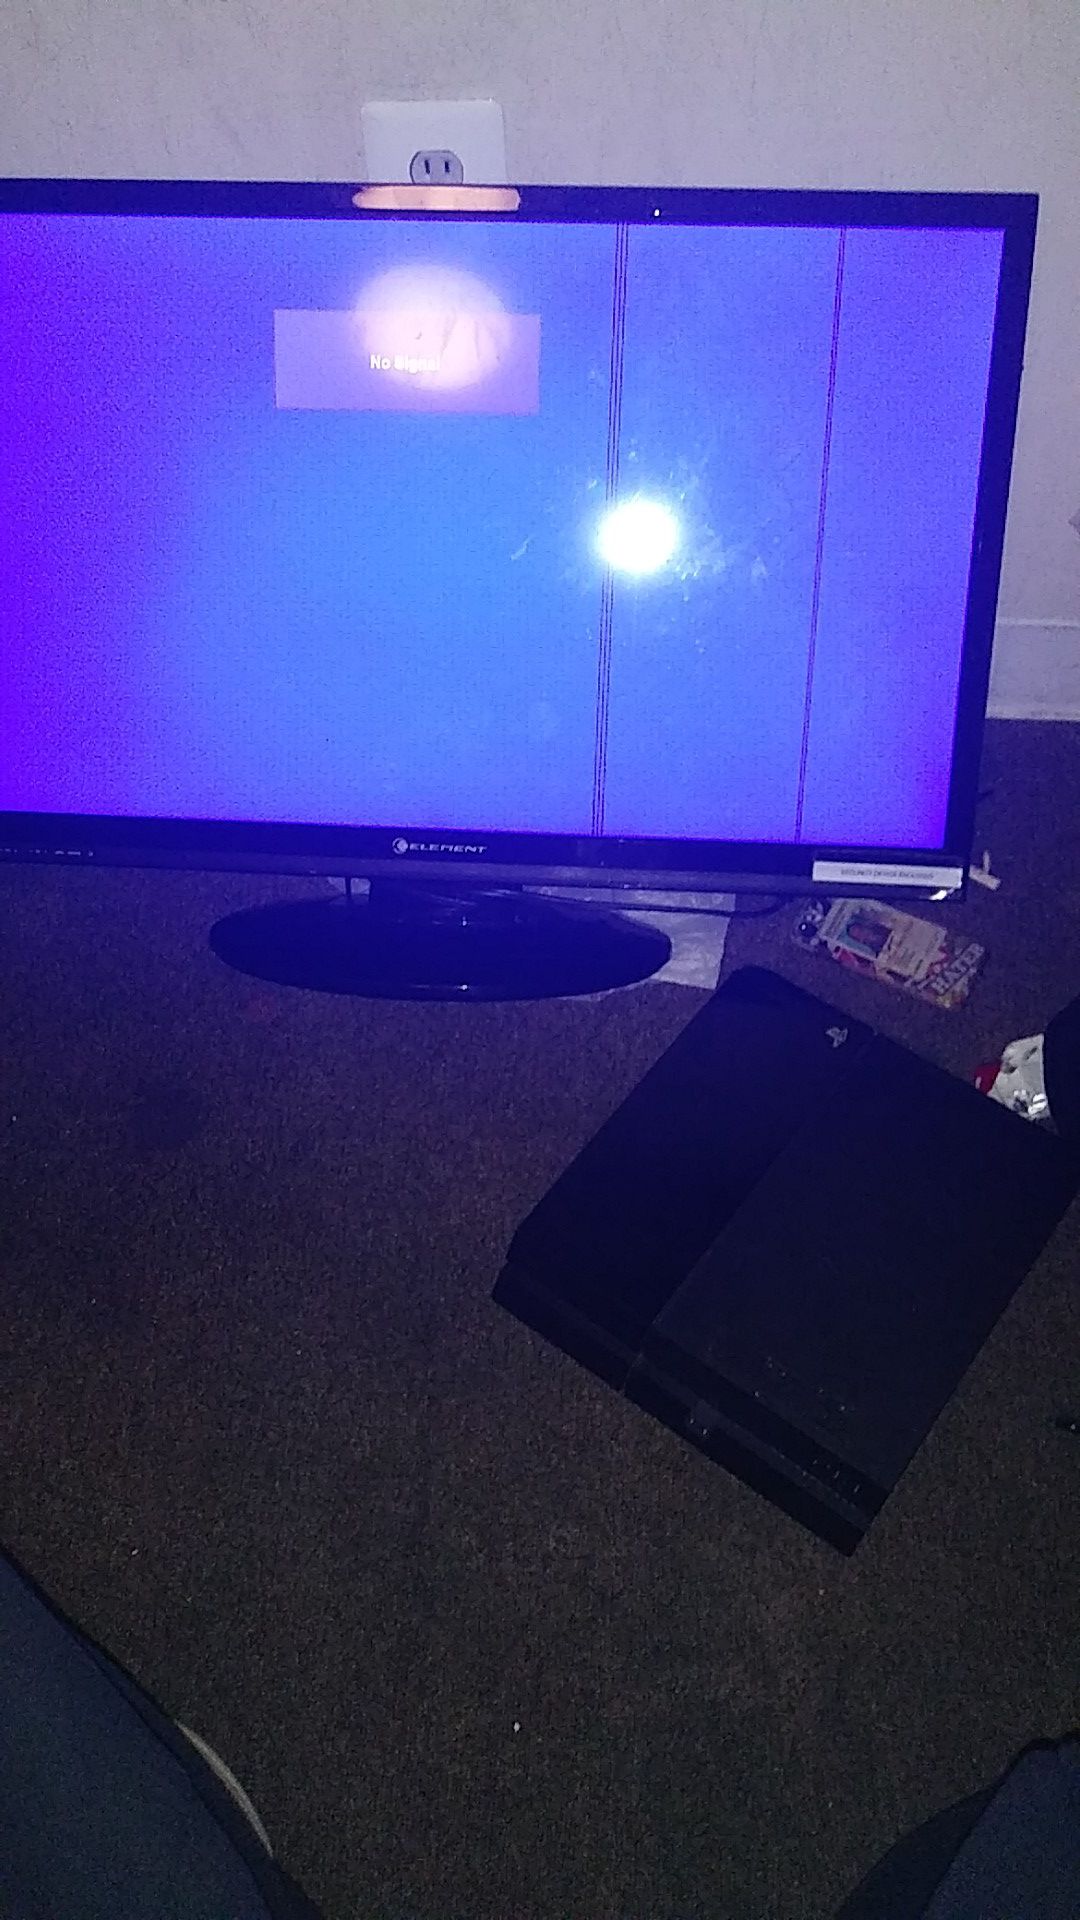 Ps4 and Tv